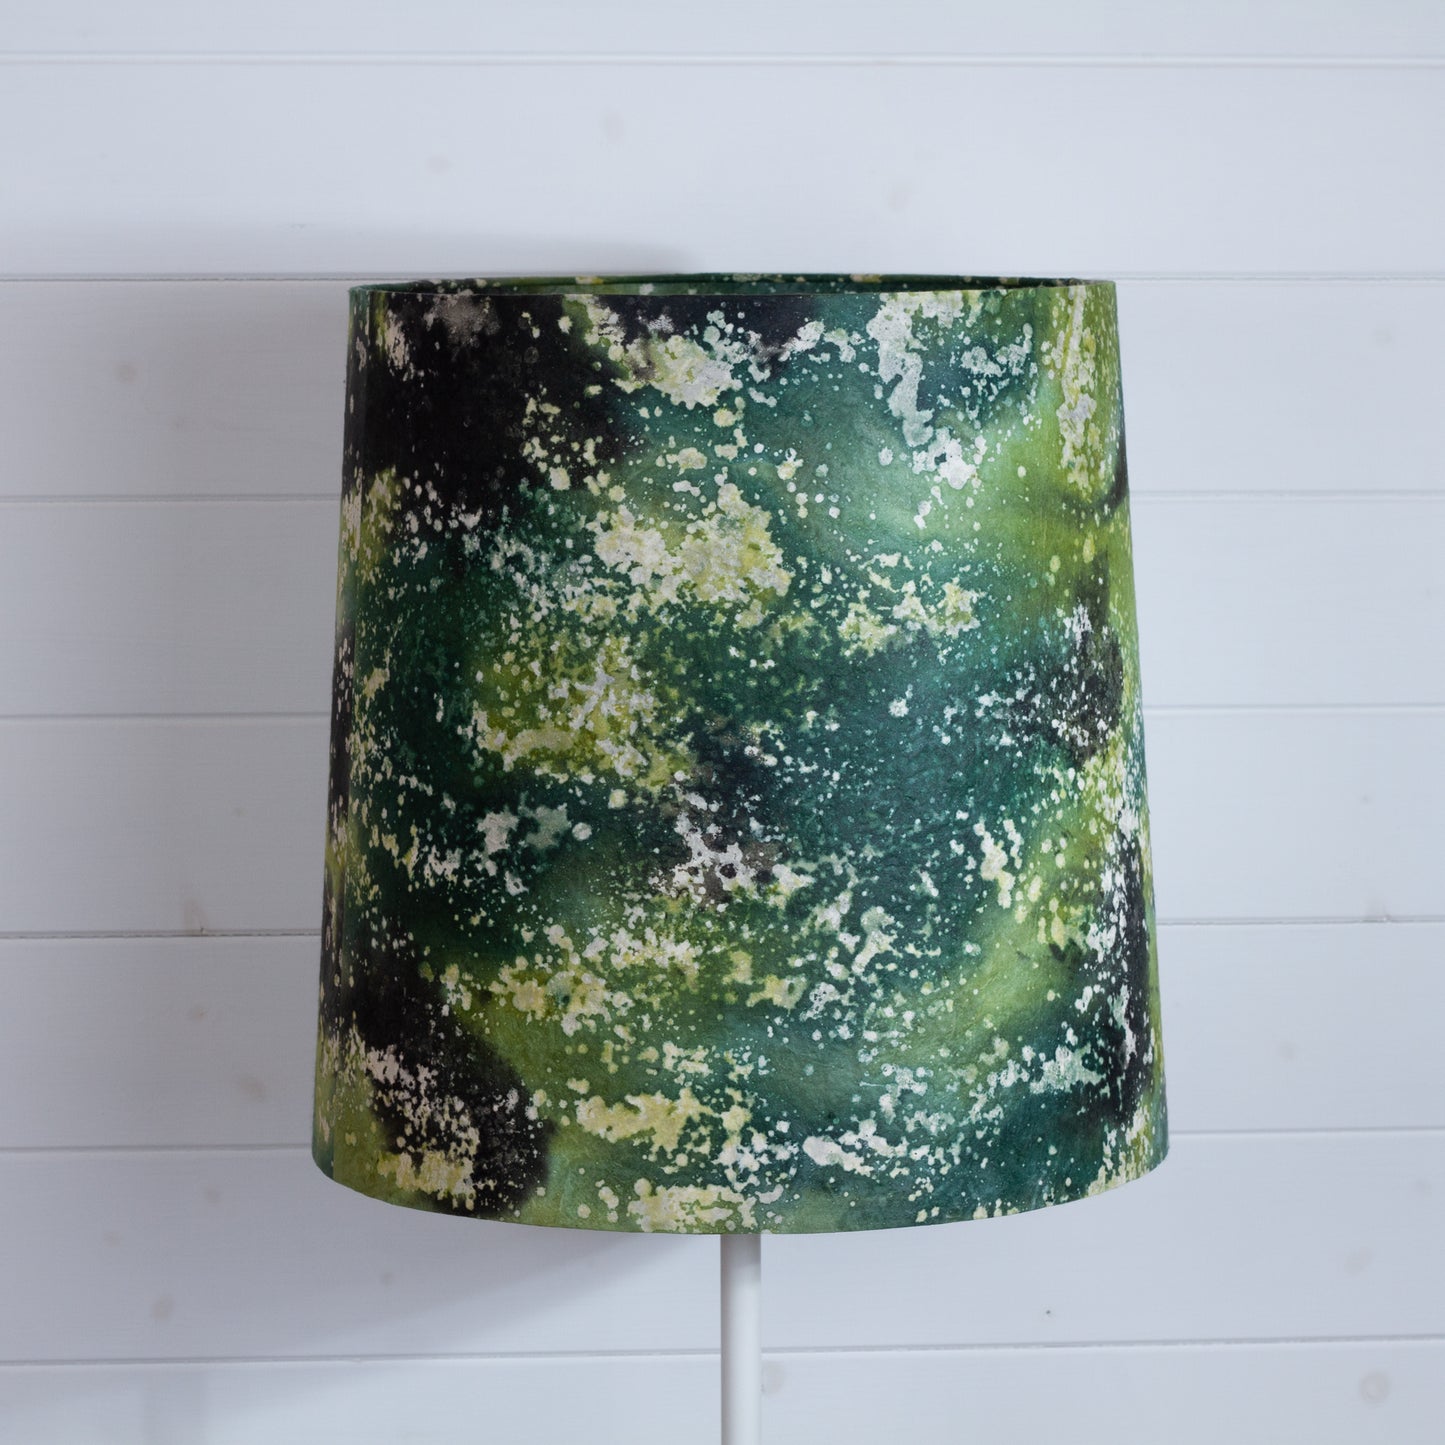 Conical Lampshade 35cm(top) x 40cm(bottom) x 40cm(height) in B114 ~ Batik Canopy Greens